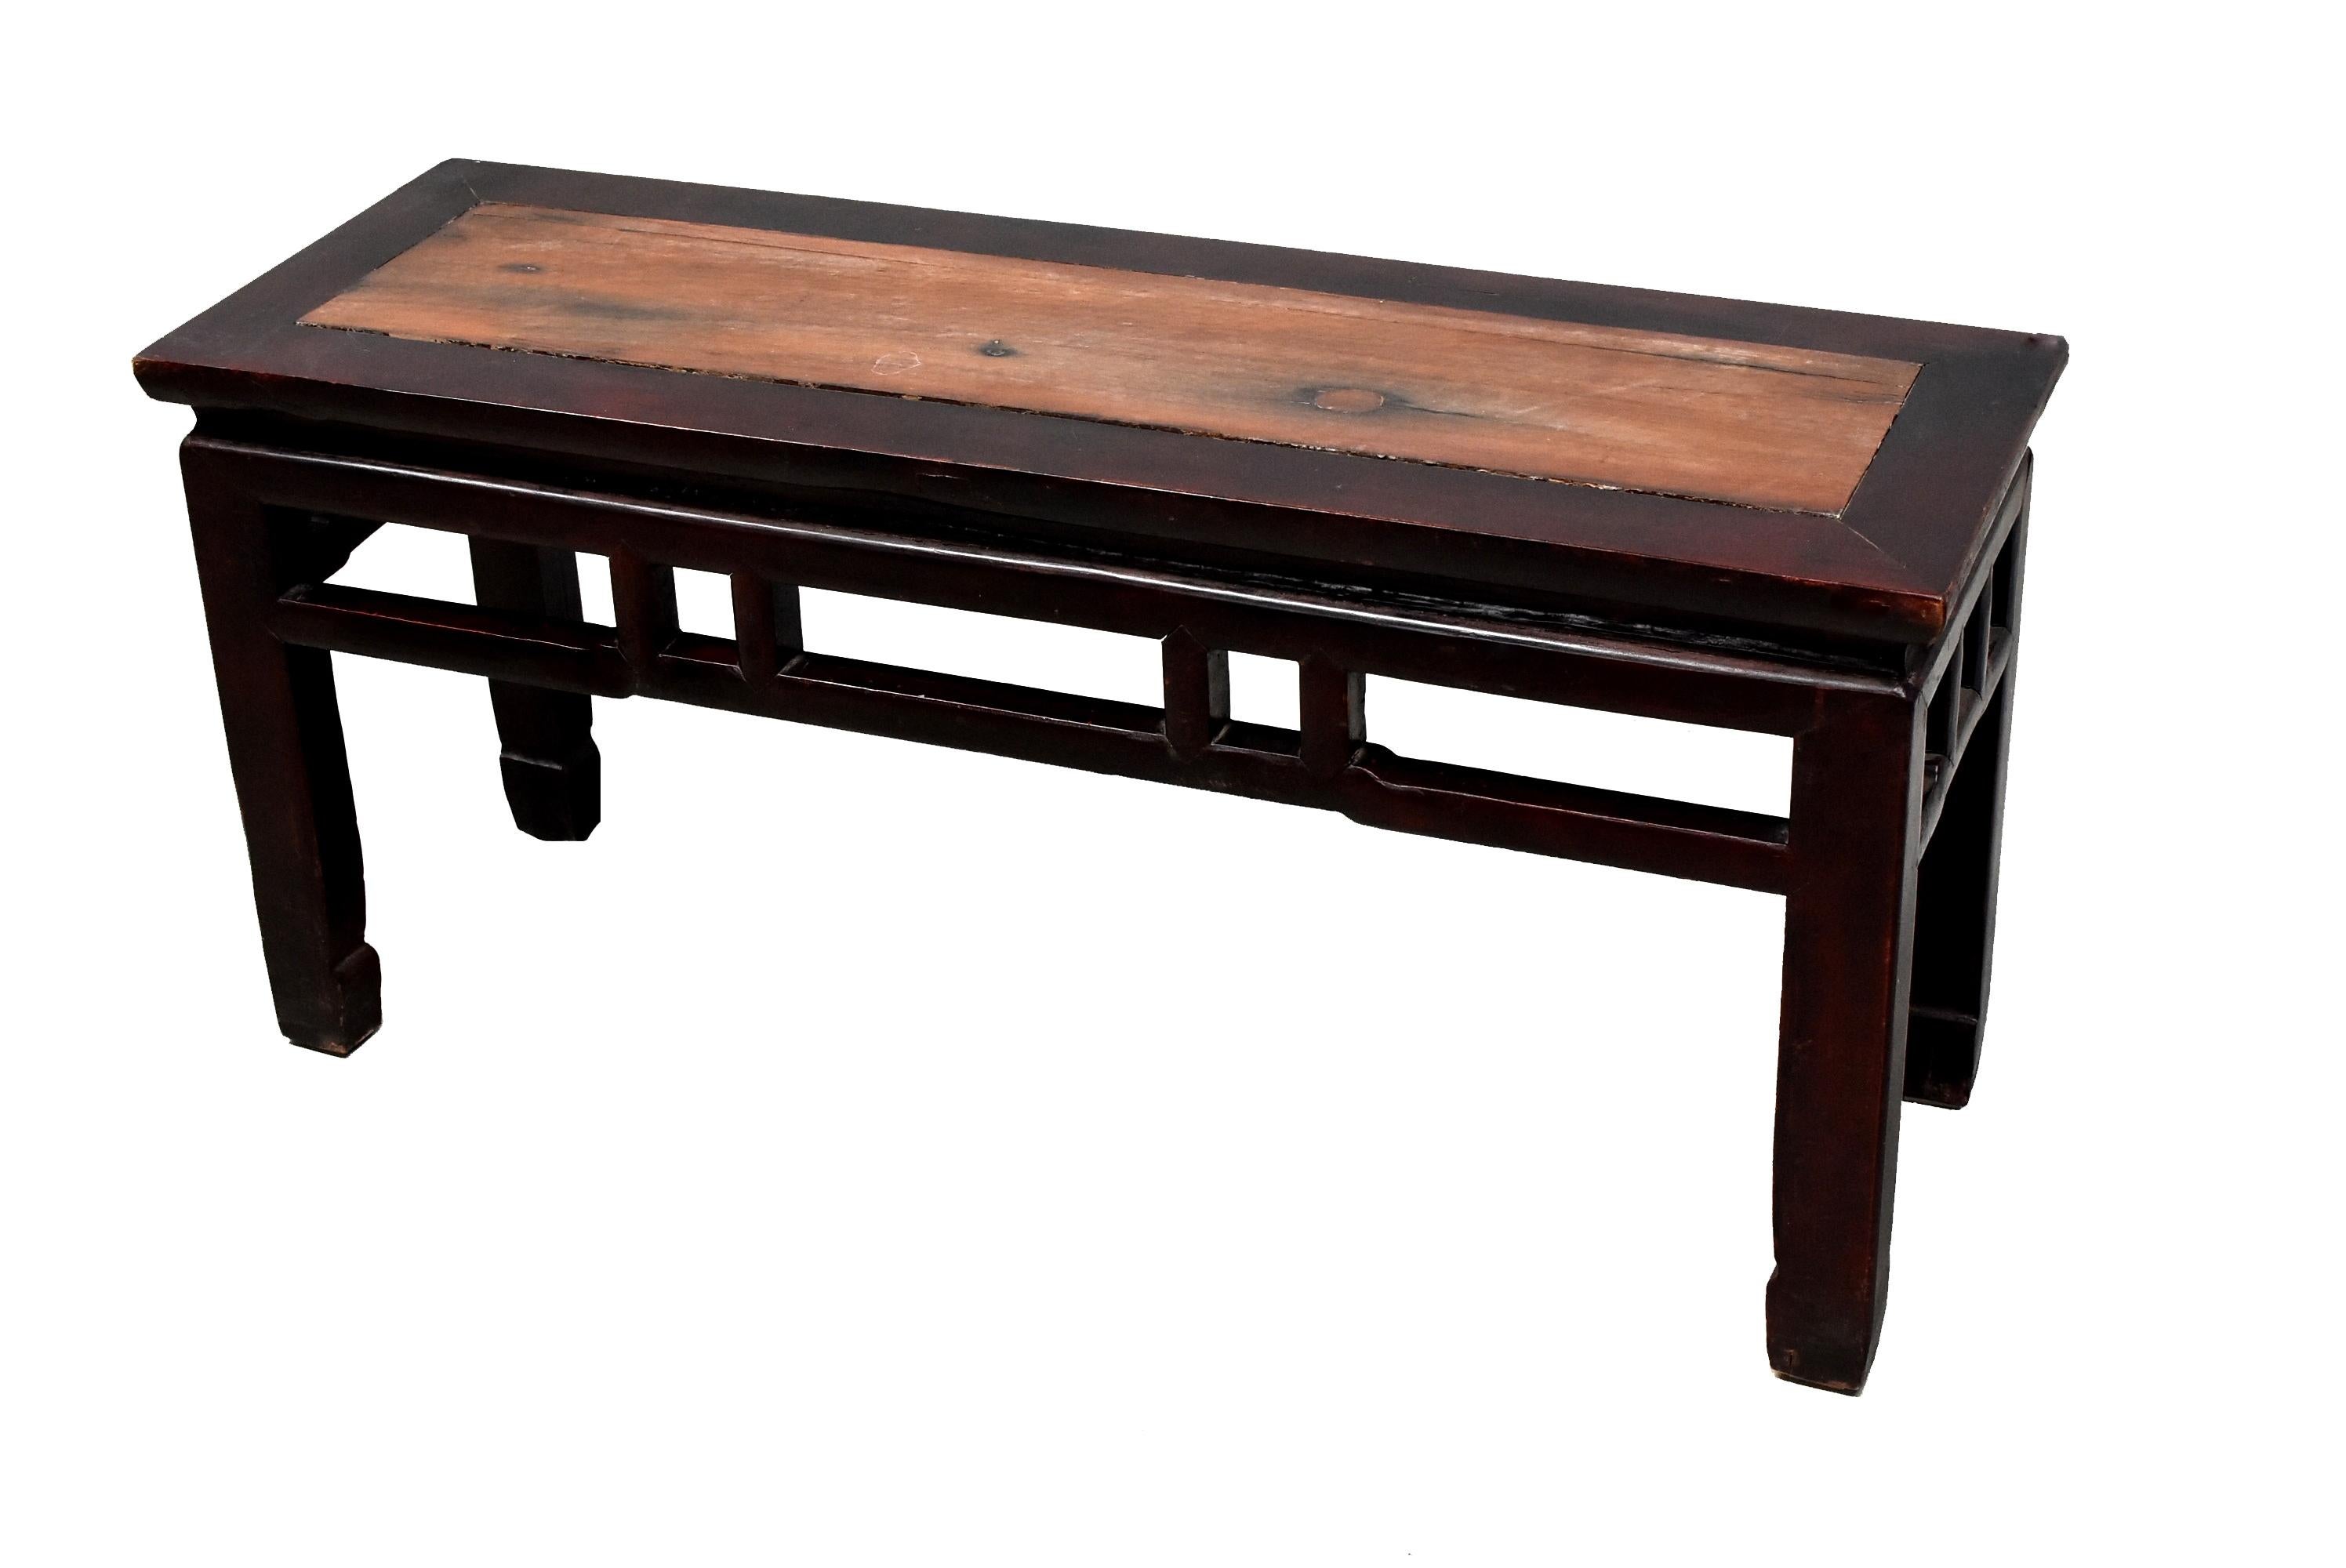 Superb value! A beautiful solid wood bench from the 19th century south of China's YangZi River. Solid single board inset in 